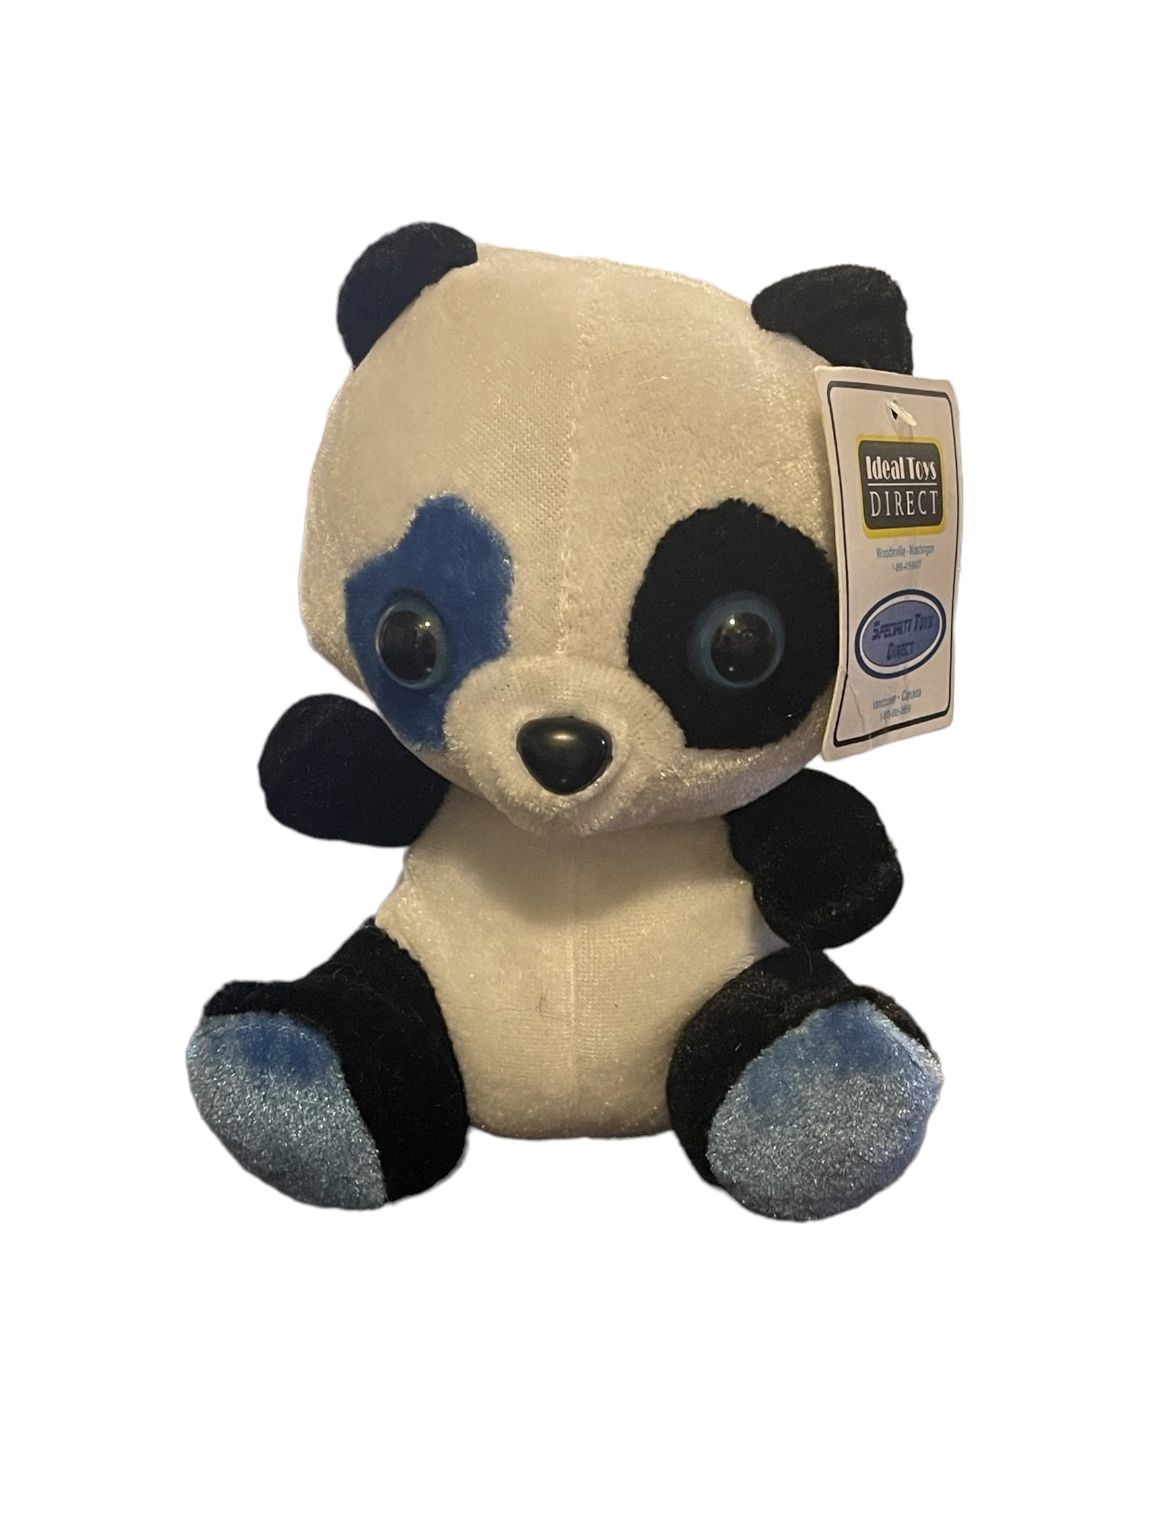 Ideal Toys Direct Panda Bear Teddy Plush - Brand New With Tag. 